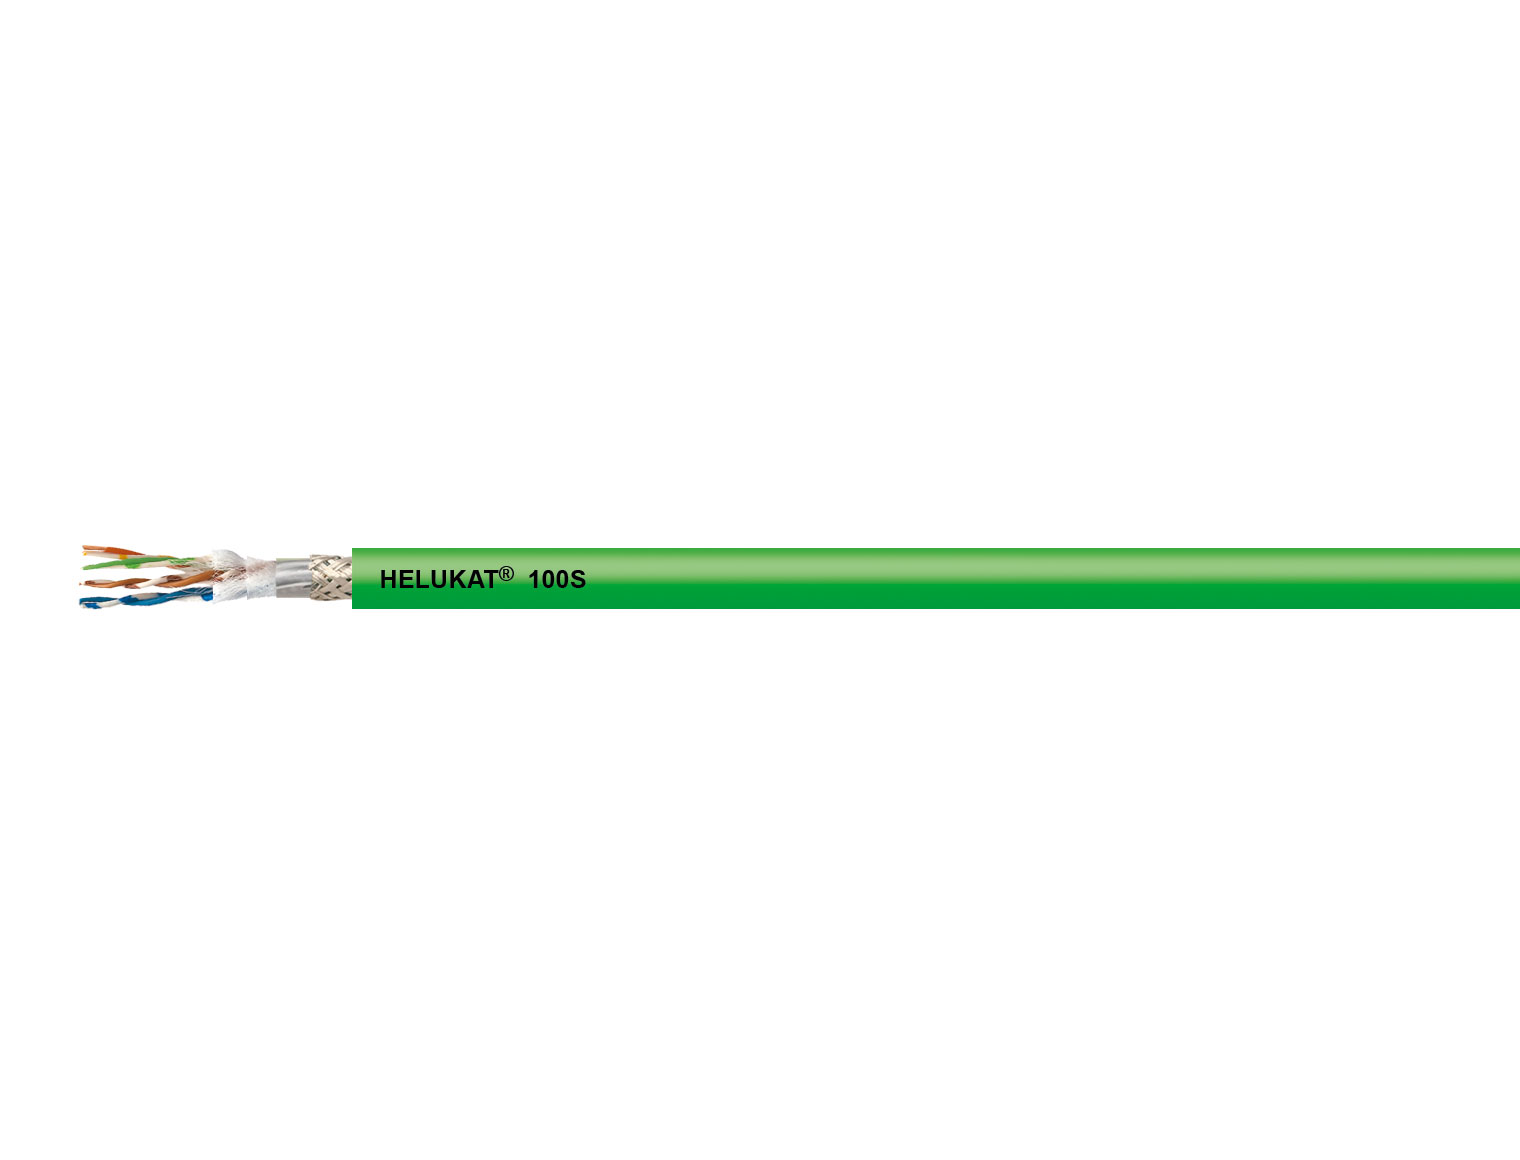 Industrial Ethernet cable, Cat. 5e, up to 155 MHz, PUR outer sheath, suitable for use in drag chains